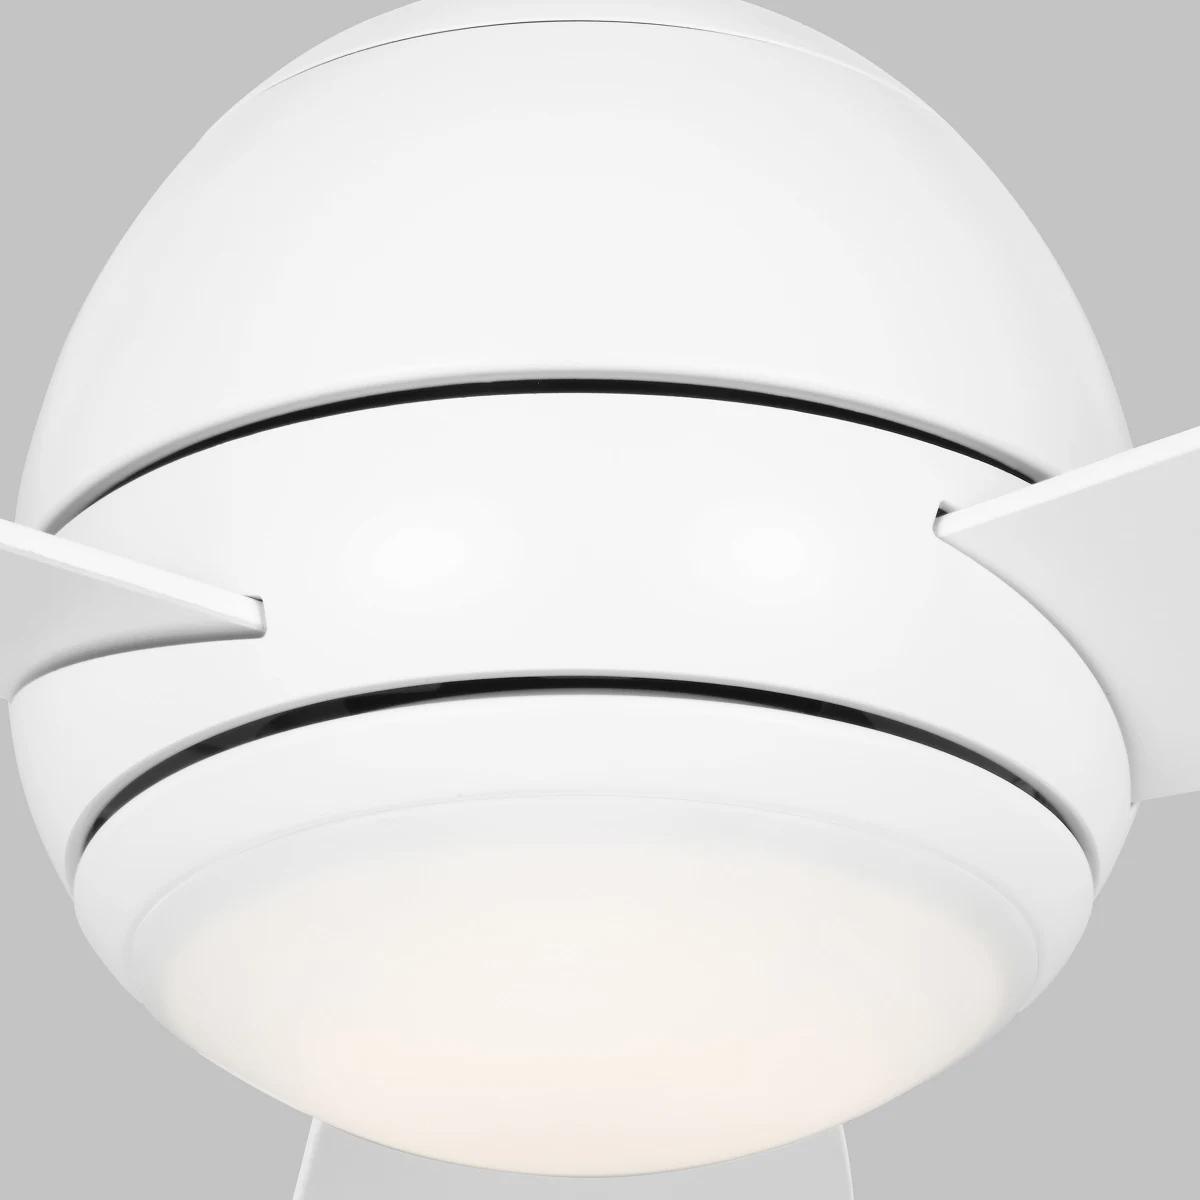 Orbis 52 Inch LED Ceiling Fan With Wall Control - Bees Lighting